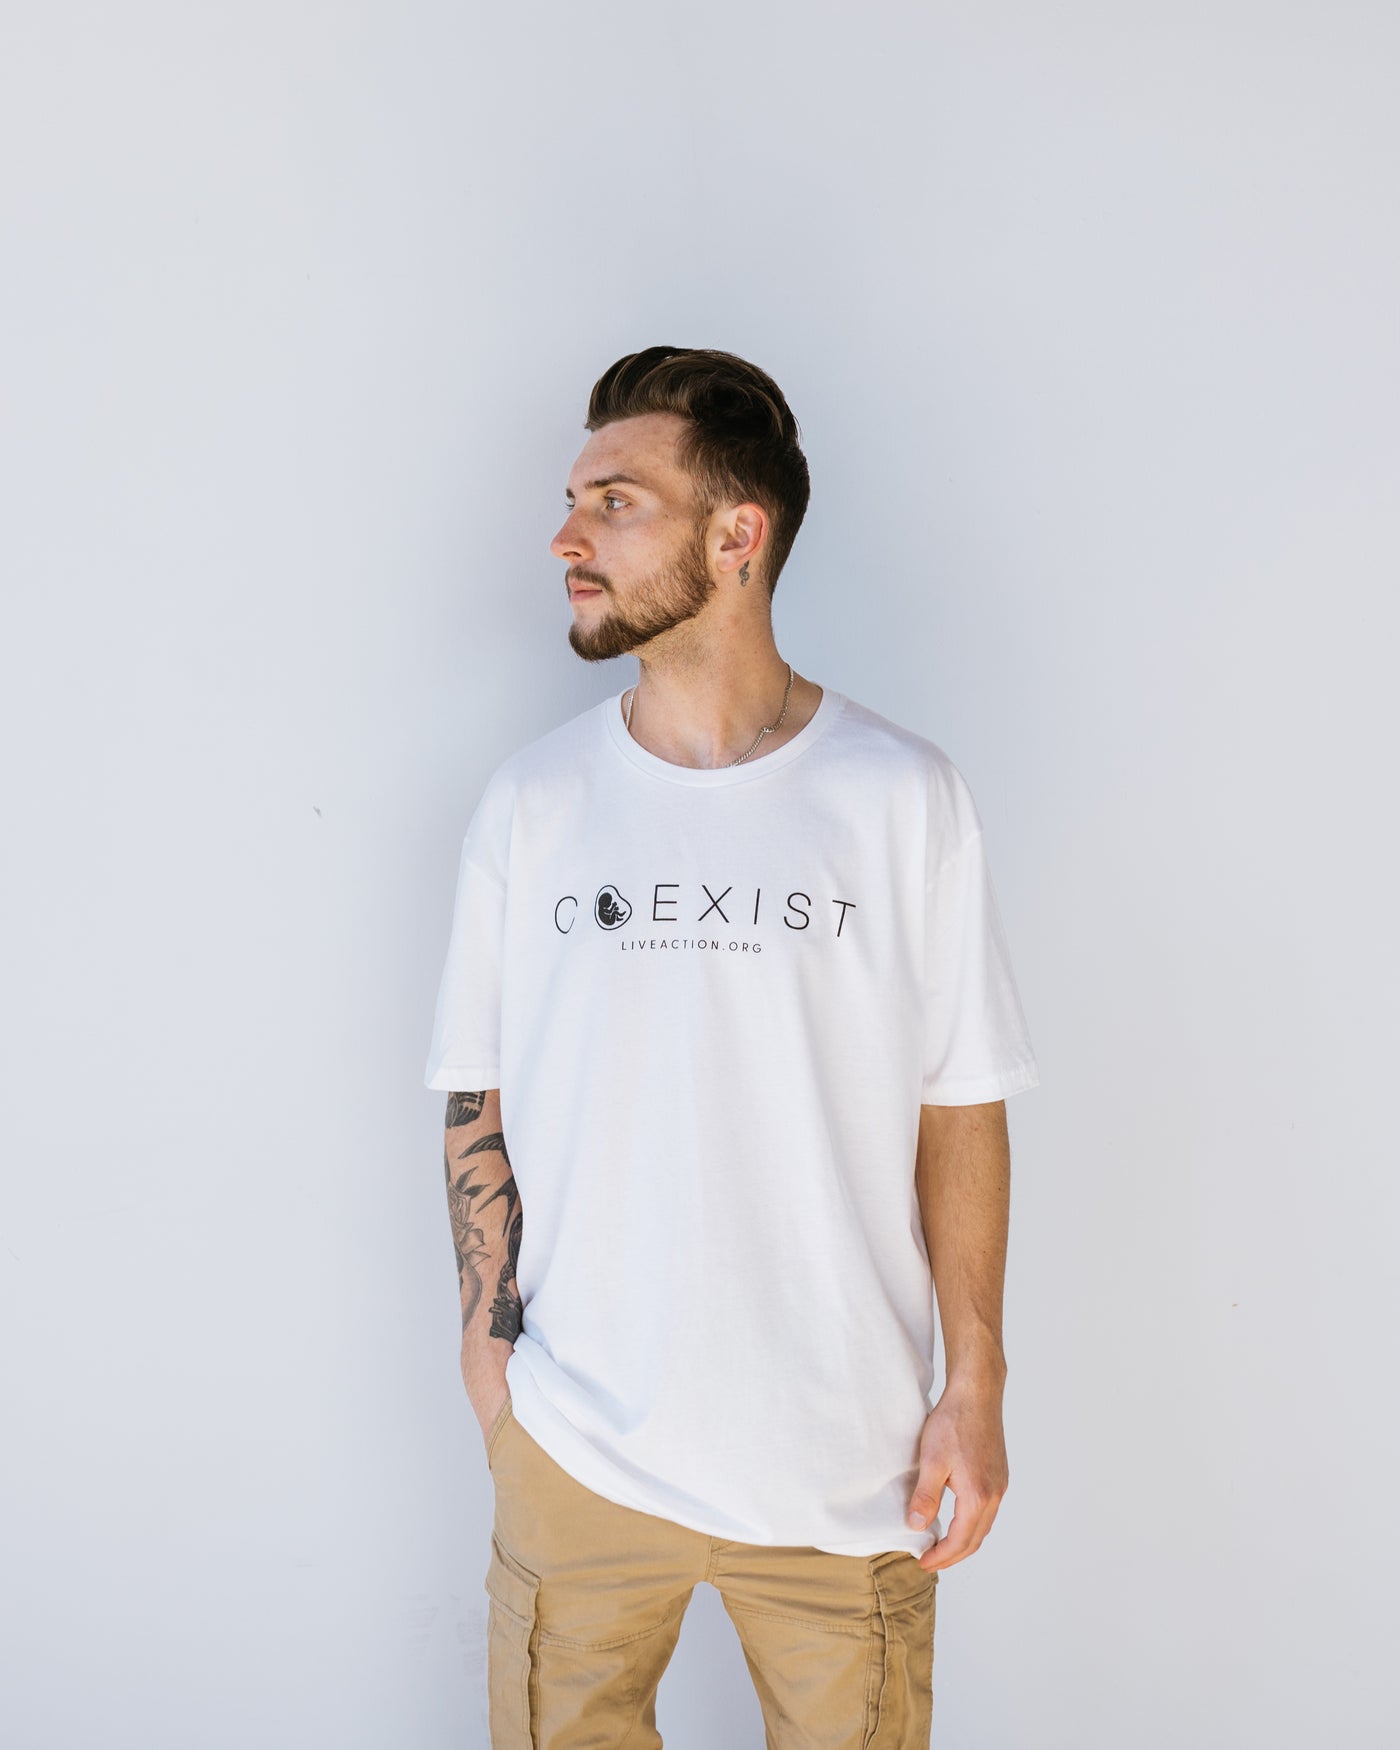 A man with brown hair and a short beard in a white tee with the word "COEXIST" written across the chest in fine black font. Inside the misshapen O is a preborn baby. Underneath the main text is Live Action's website written in small font.